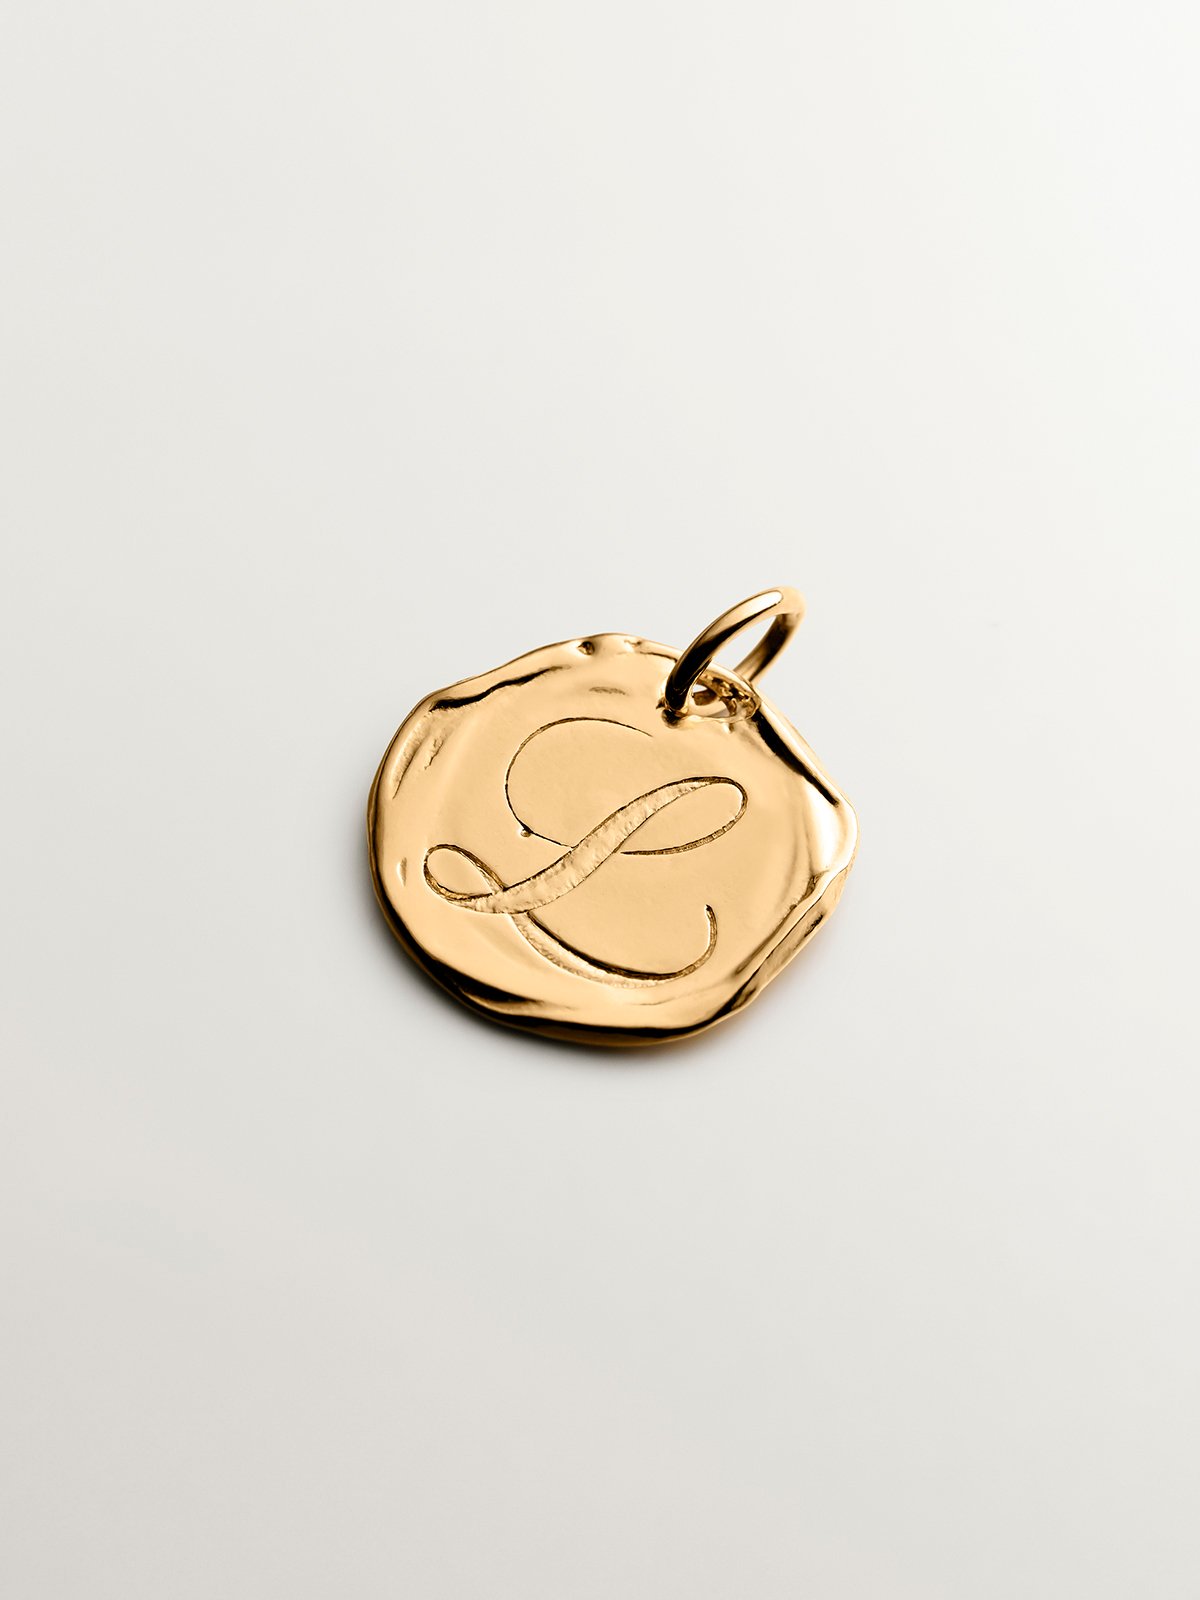 Handcrafted 925 silver charm bathed in 18K yellow gold with an initial L